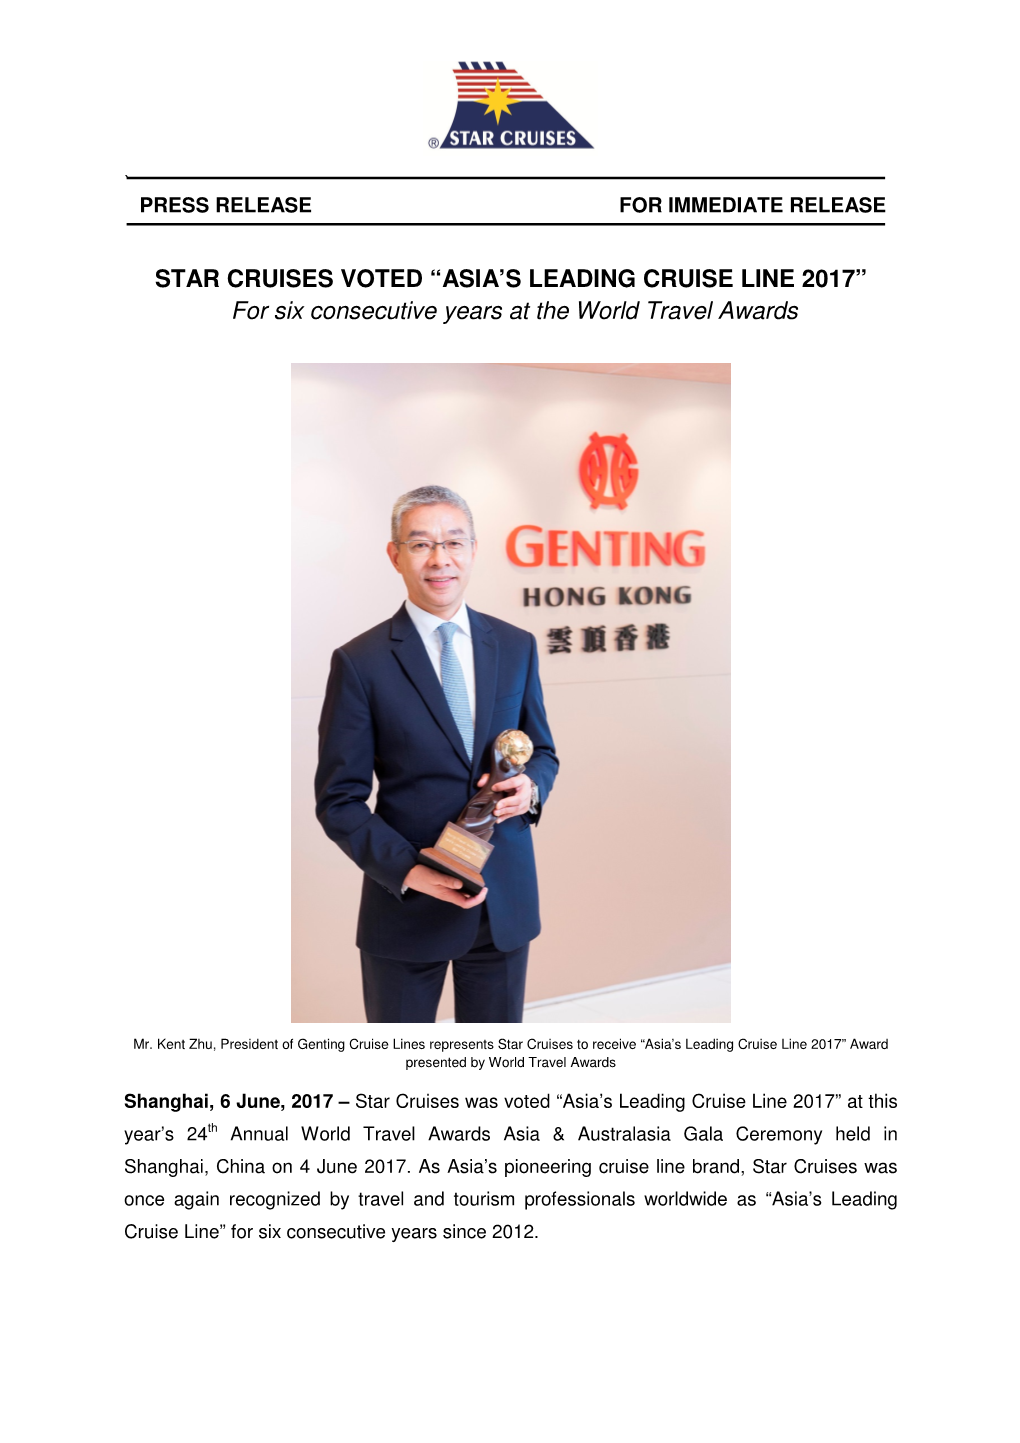 STAR CRUISES VOTED “ASIA's LEADING CRUISE LINE 2017” for Six Consecutive Years at the World Travel Awards